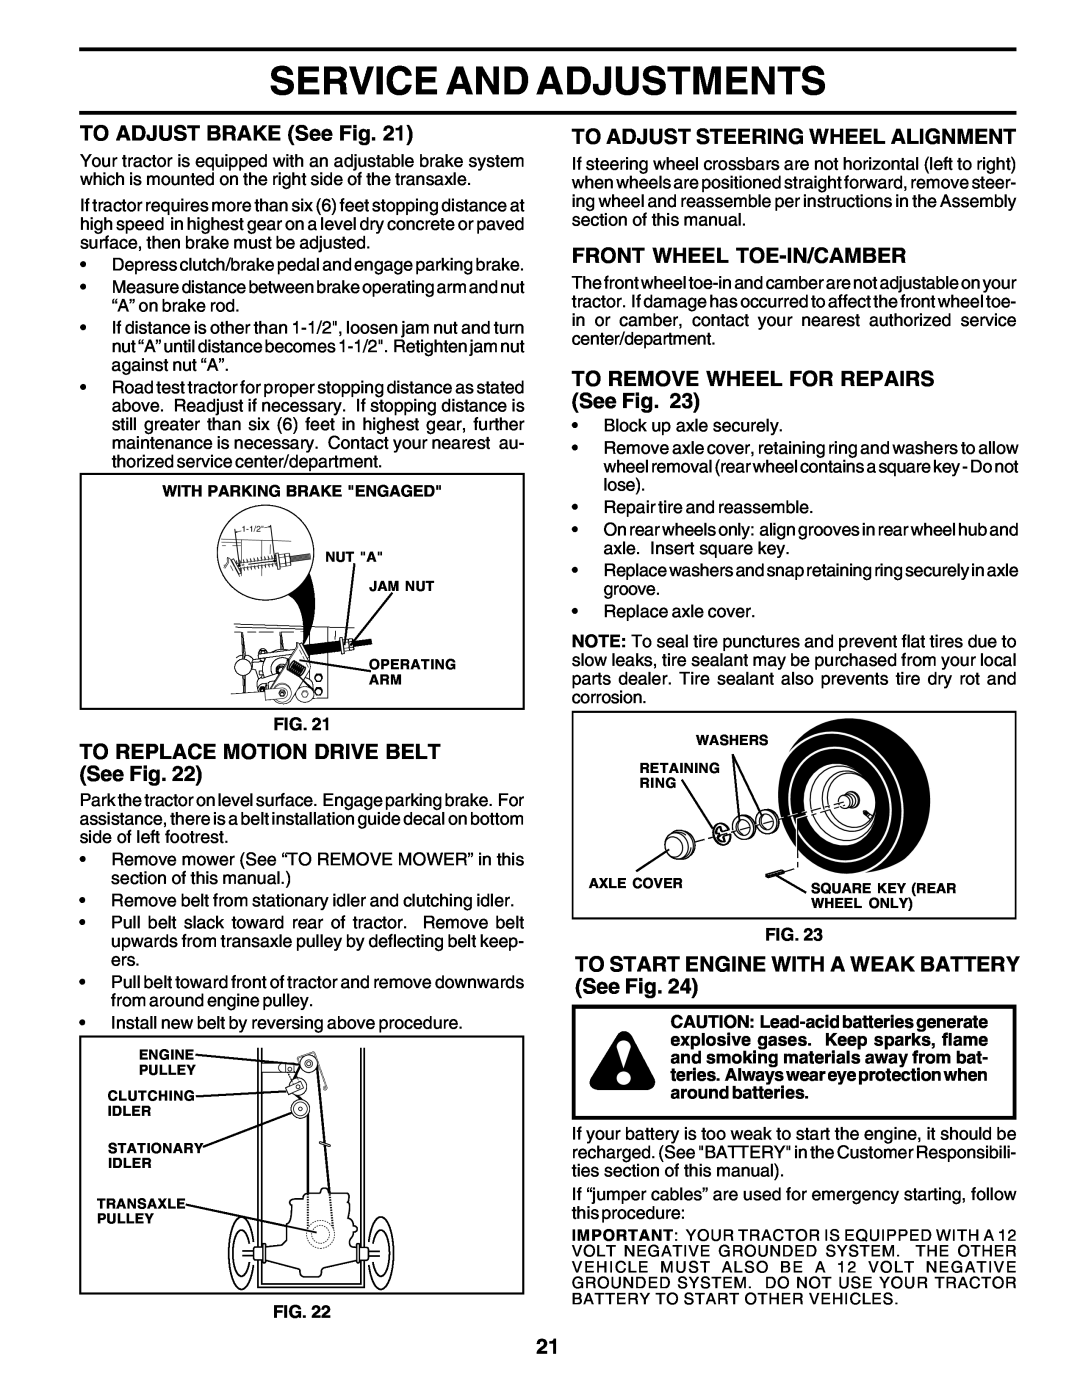 Weed Eater WE12538J manual Service And Adjustments, TO ADJUST BRAKE See Fig, TO REPLACE MOTION DRIVE BELT See Fig 